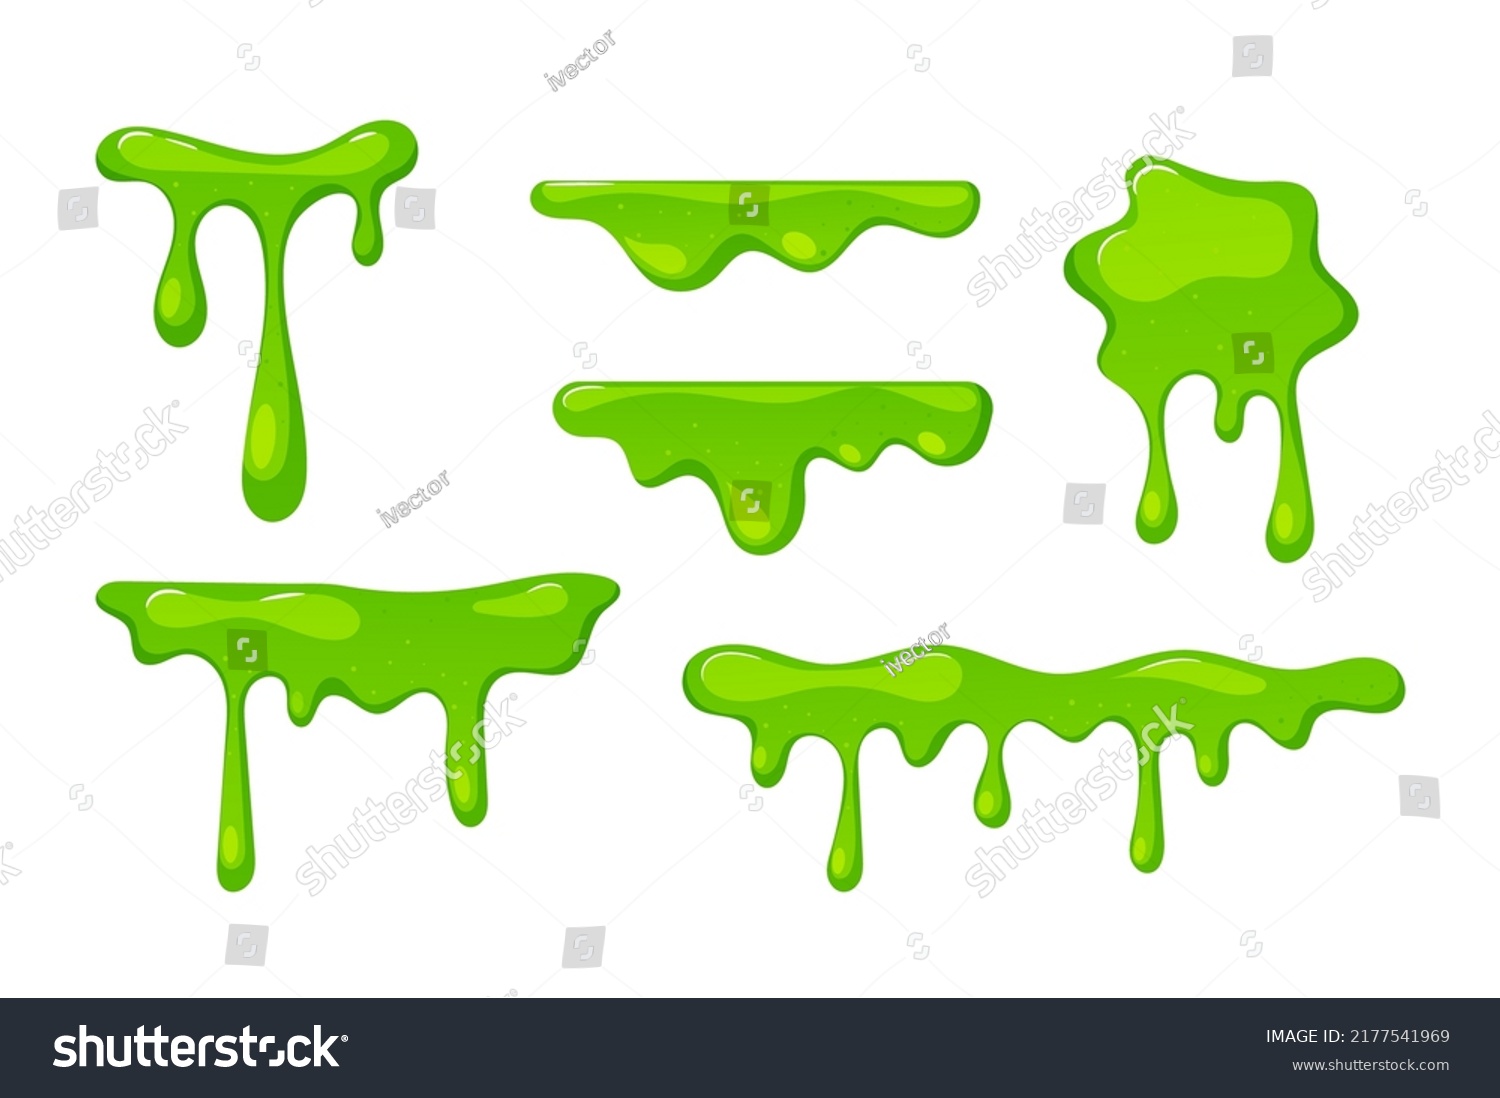 Set of Dripping Green Slime Textures, Border and Spots Isolated Elements on White Background, Falling Syrup Drops Dribble Down, Sticky Radioactive Toxic Liquid, Zombie Goo. Cartoon Vector Illustration #2177541969